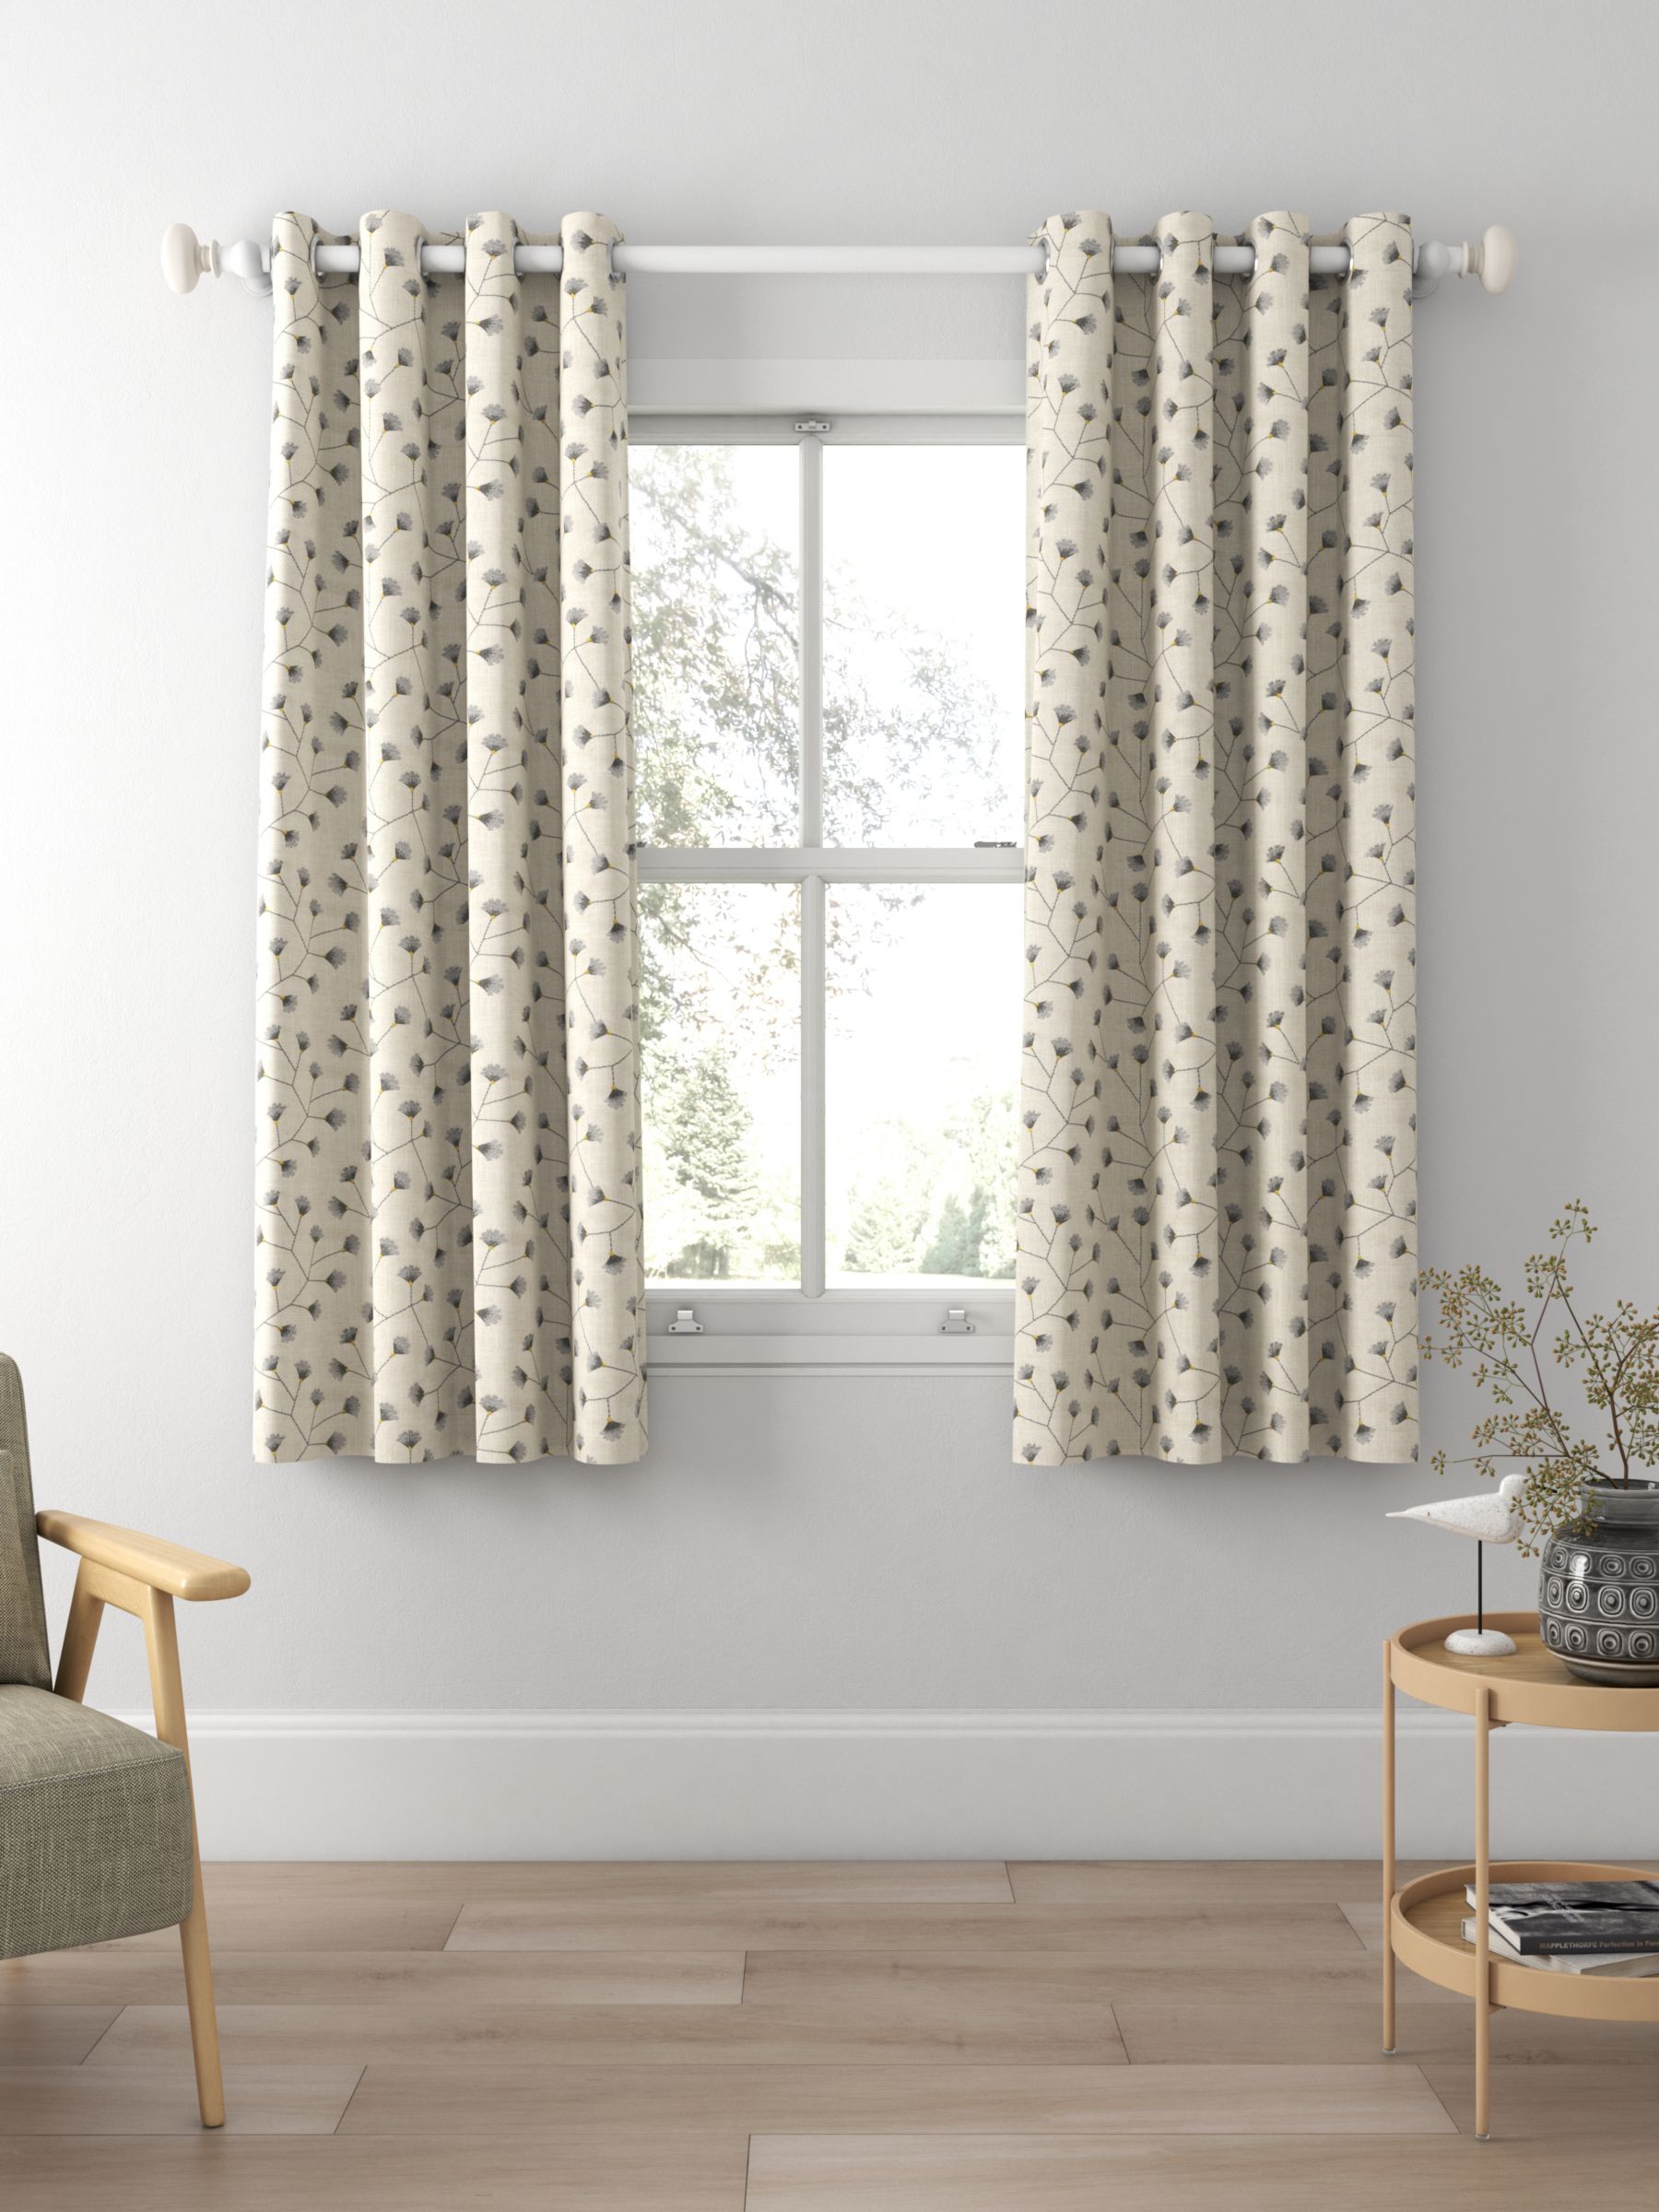 Sanderson Gingko Trail Made to Measure Curtains, Fig/Olive